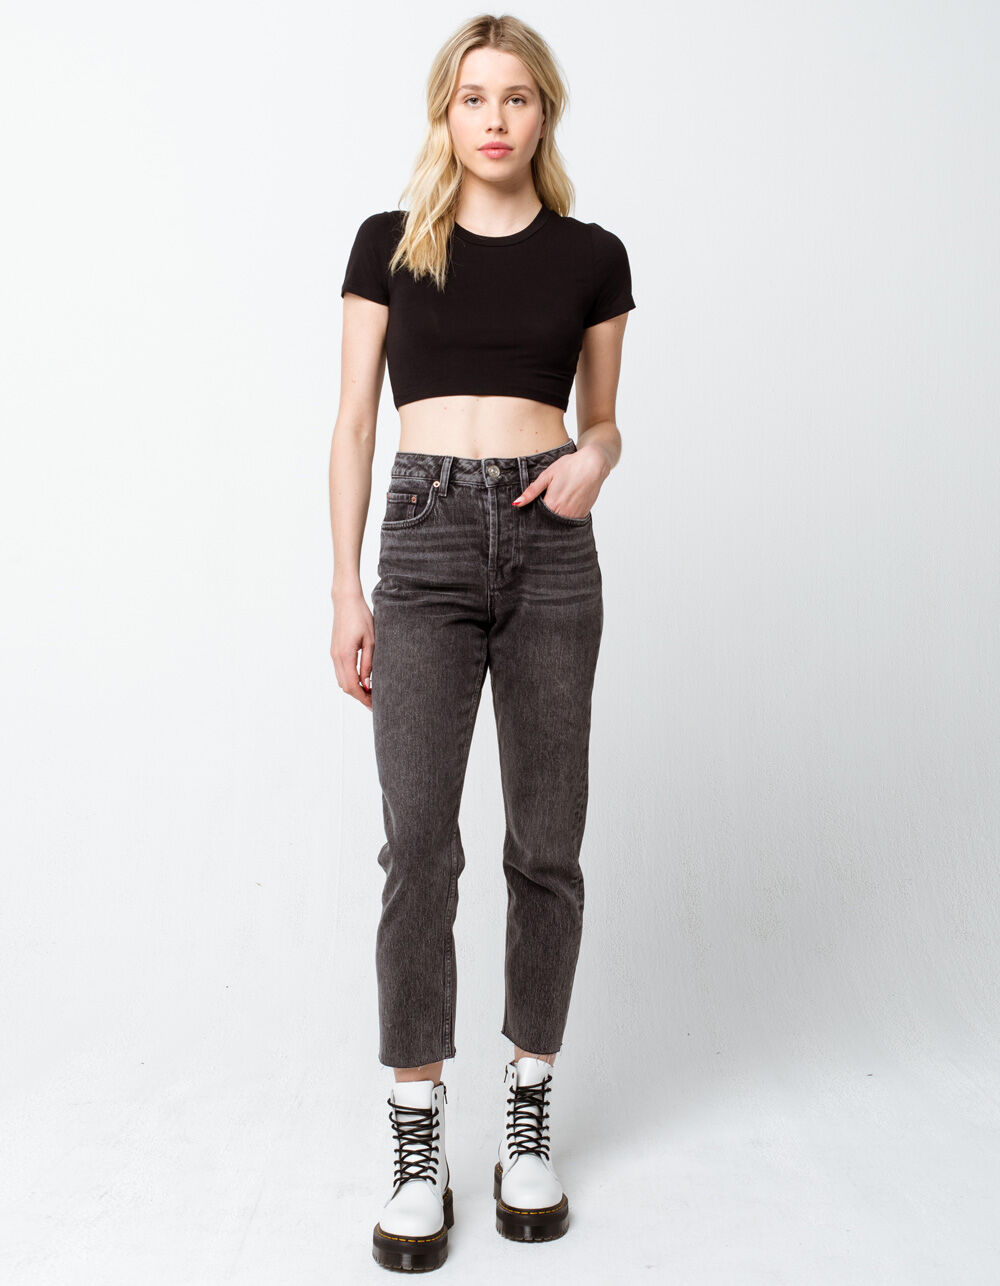 HEART & HIPS Cropped Crew Womens Black Baby Tee - BLACK | Tillys